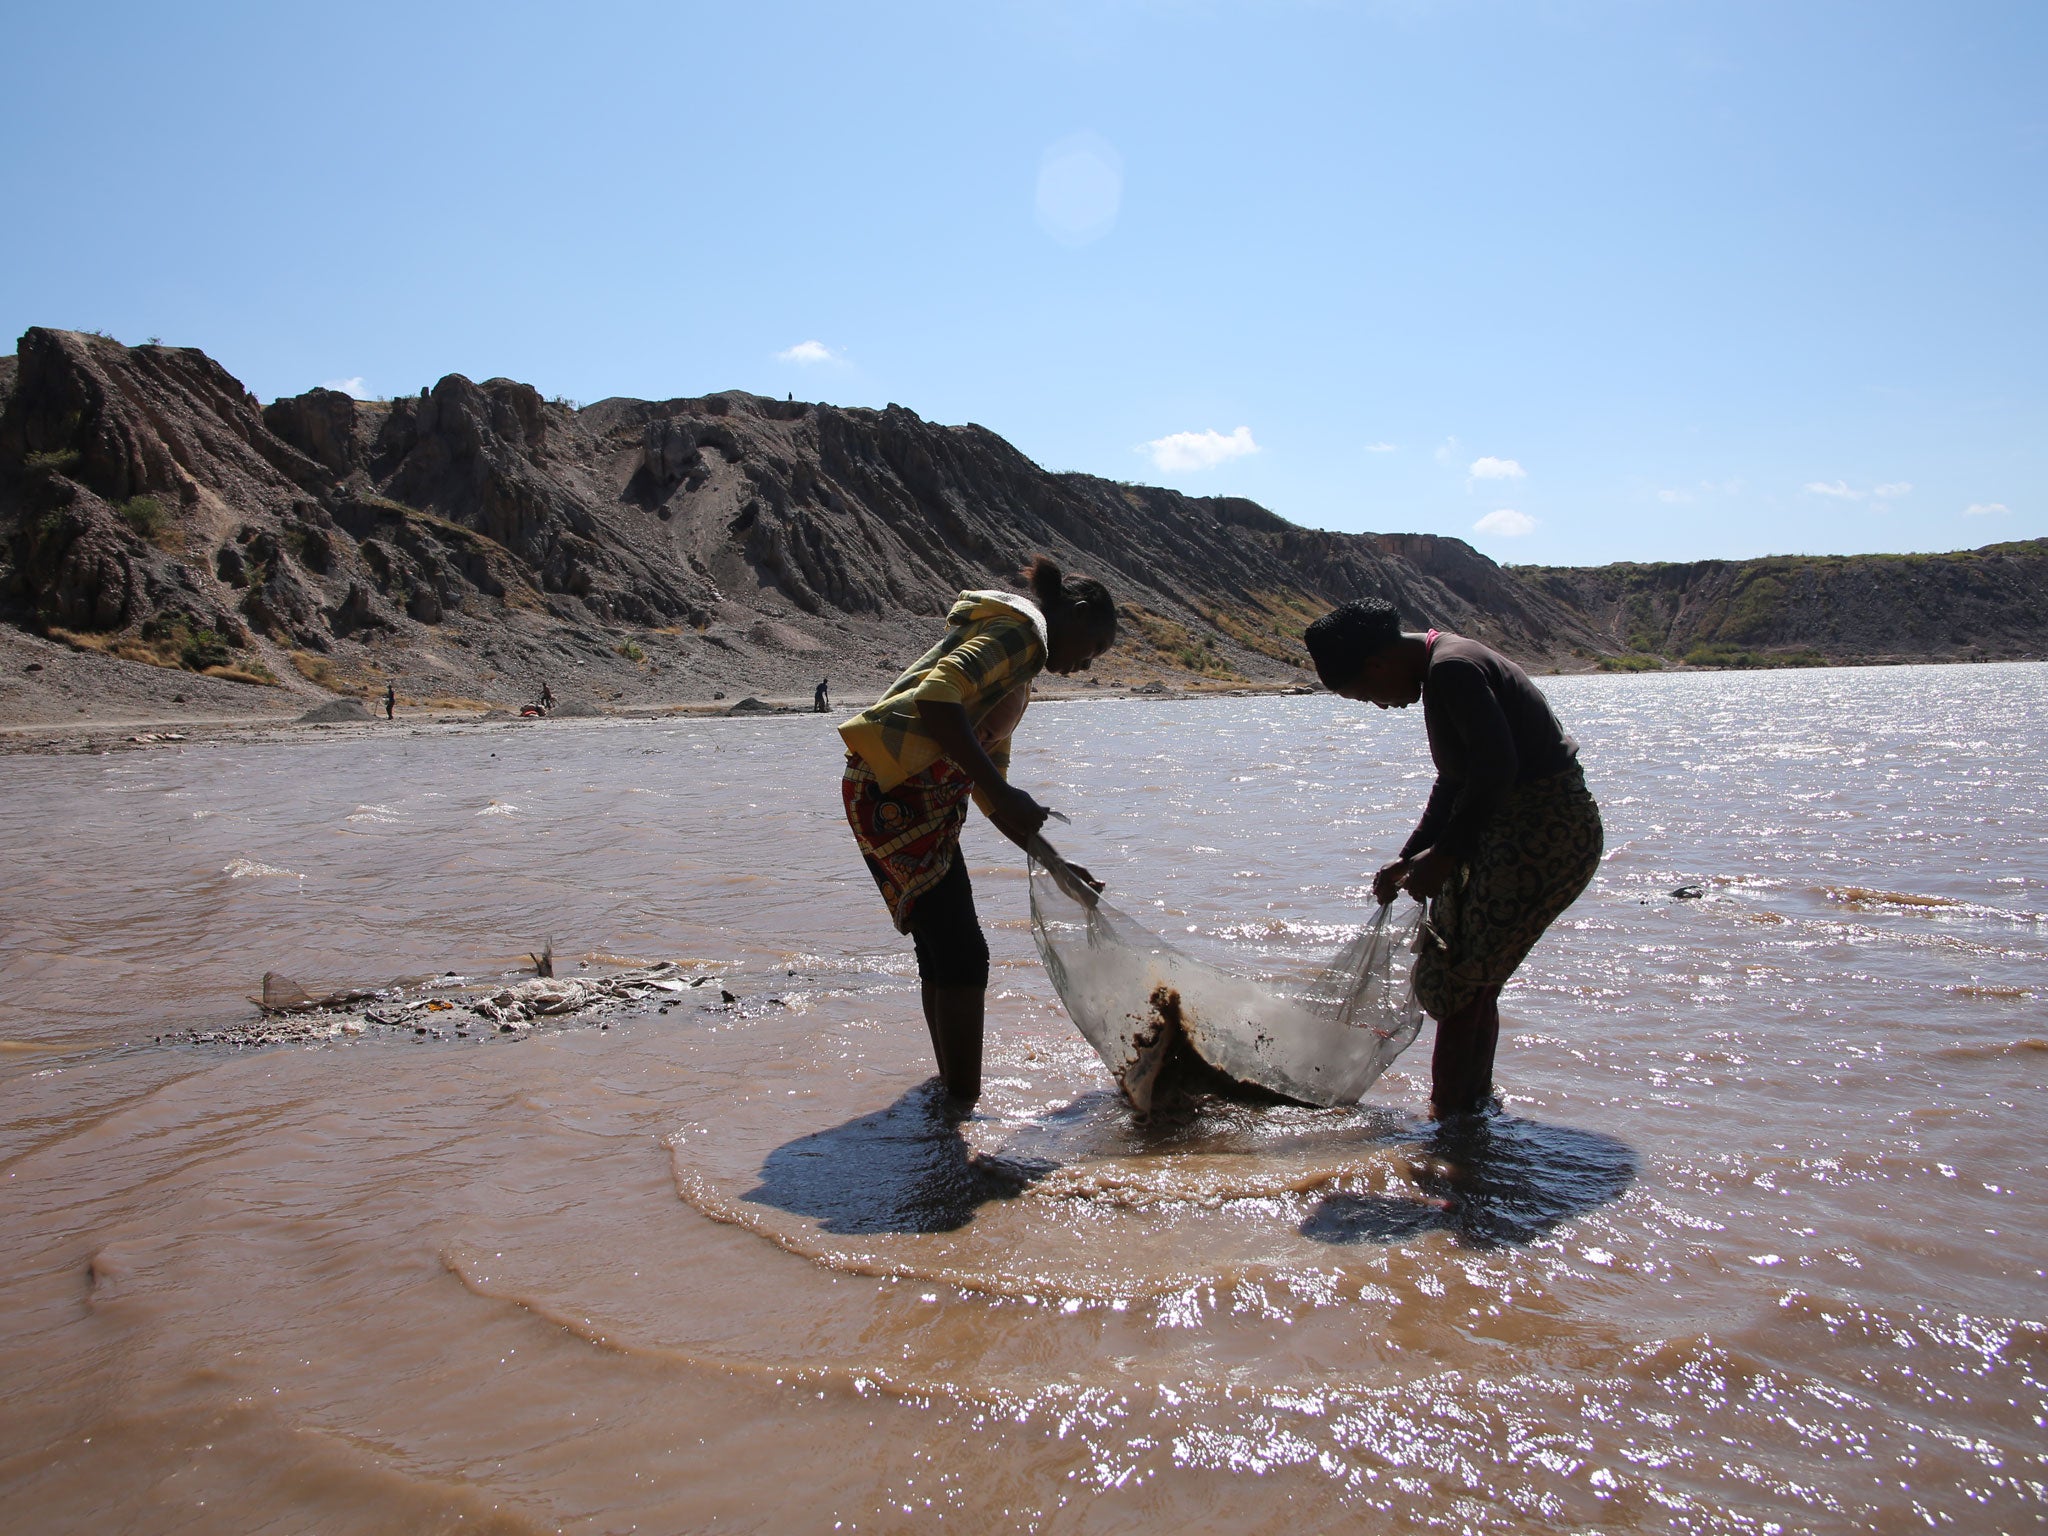 Women wash mineral ore in Lake Malo, Kapata on the outskirts of Kolwezi,DRC. One woman told researchers that it was very difficult working long daysfrom 6am until 6pm in the sun with no cover and no shade, May 2015